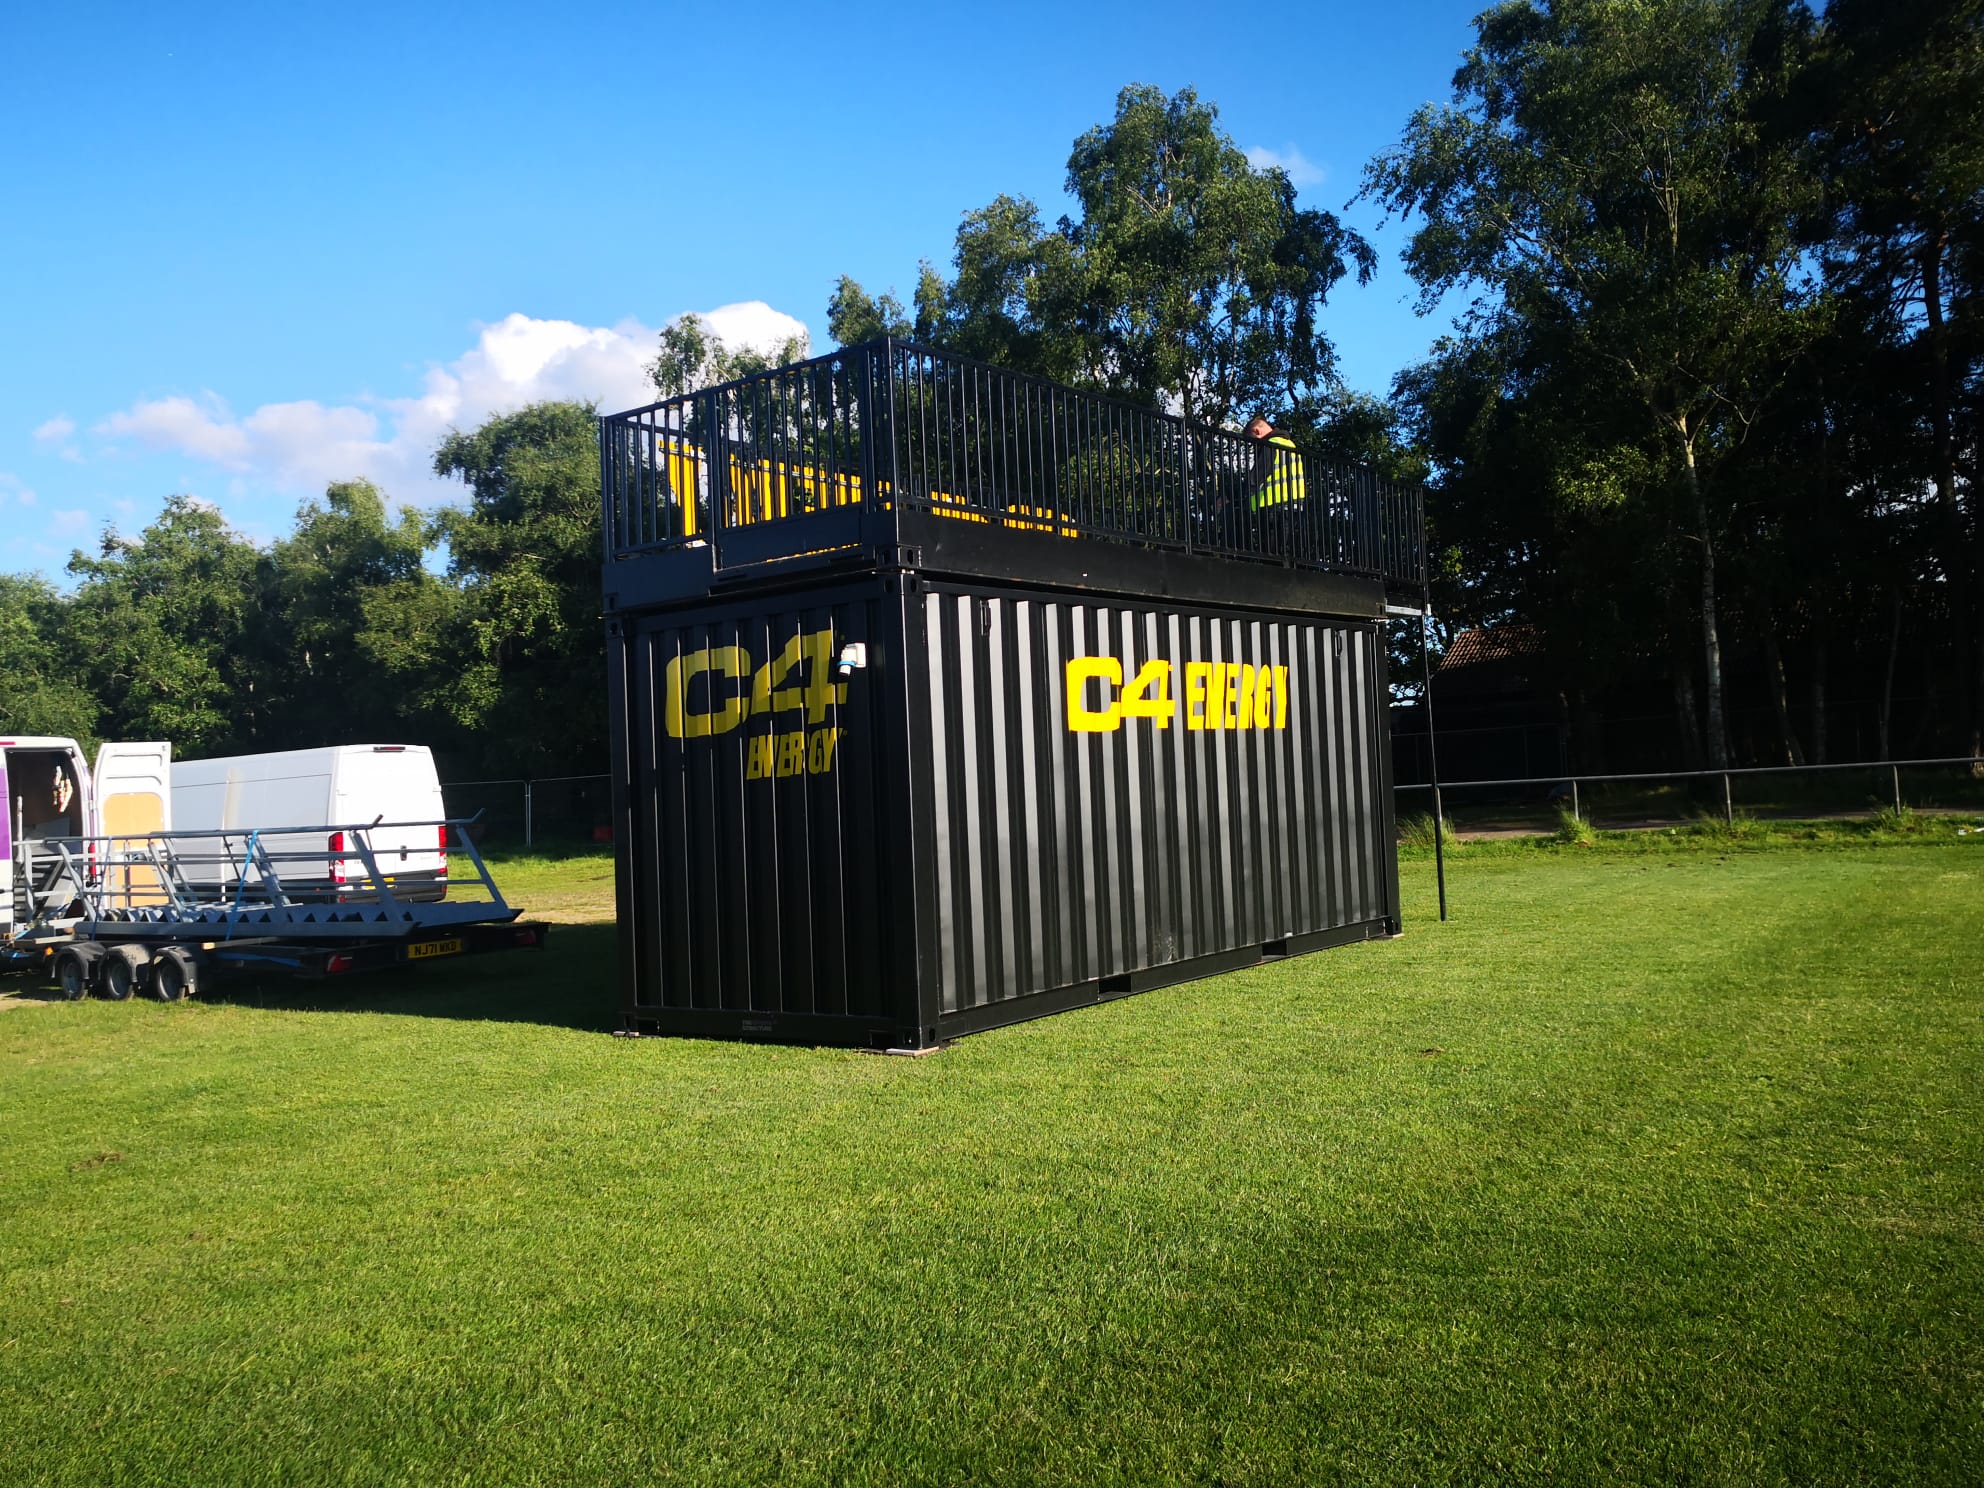 Nutrabolt C4 Energy Drink pop-up shipping container bar at bournmouth 7s festival events